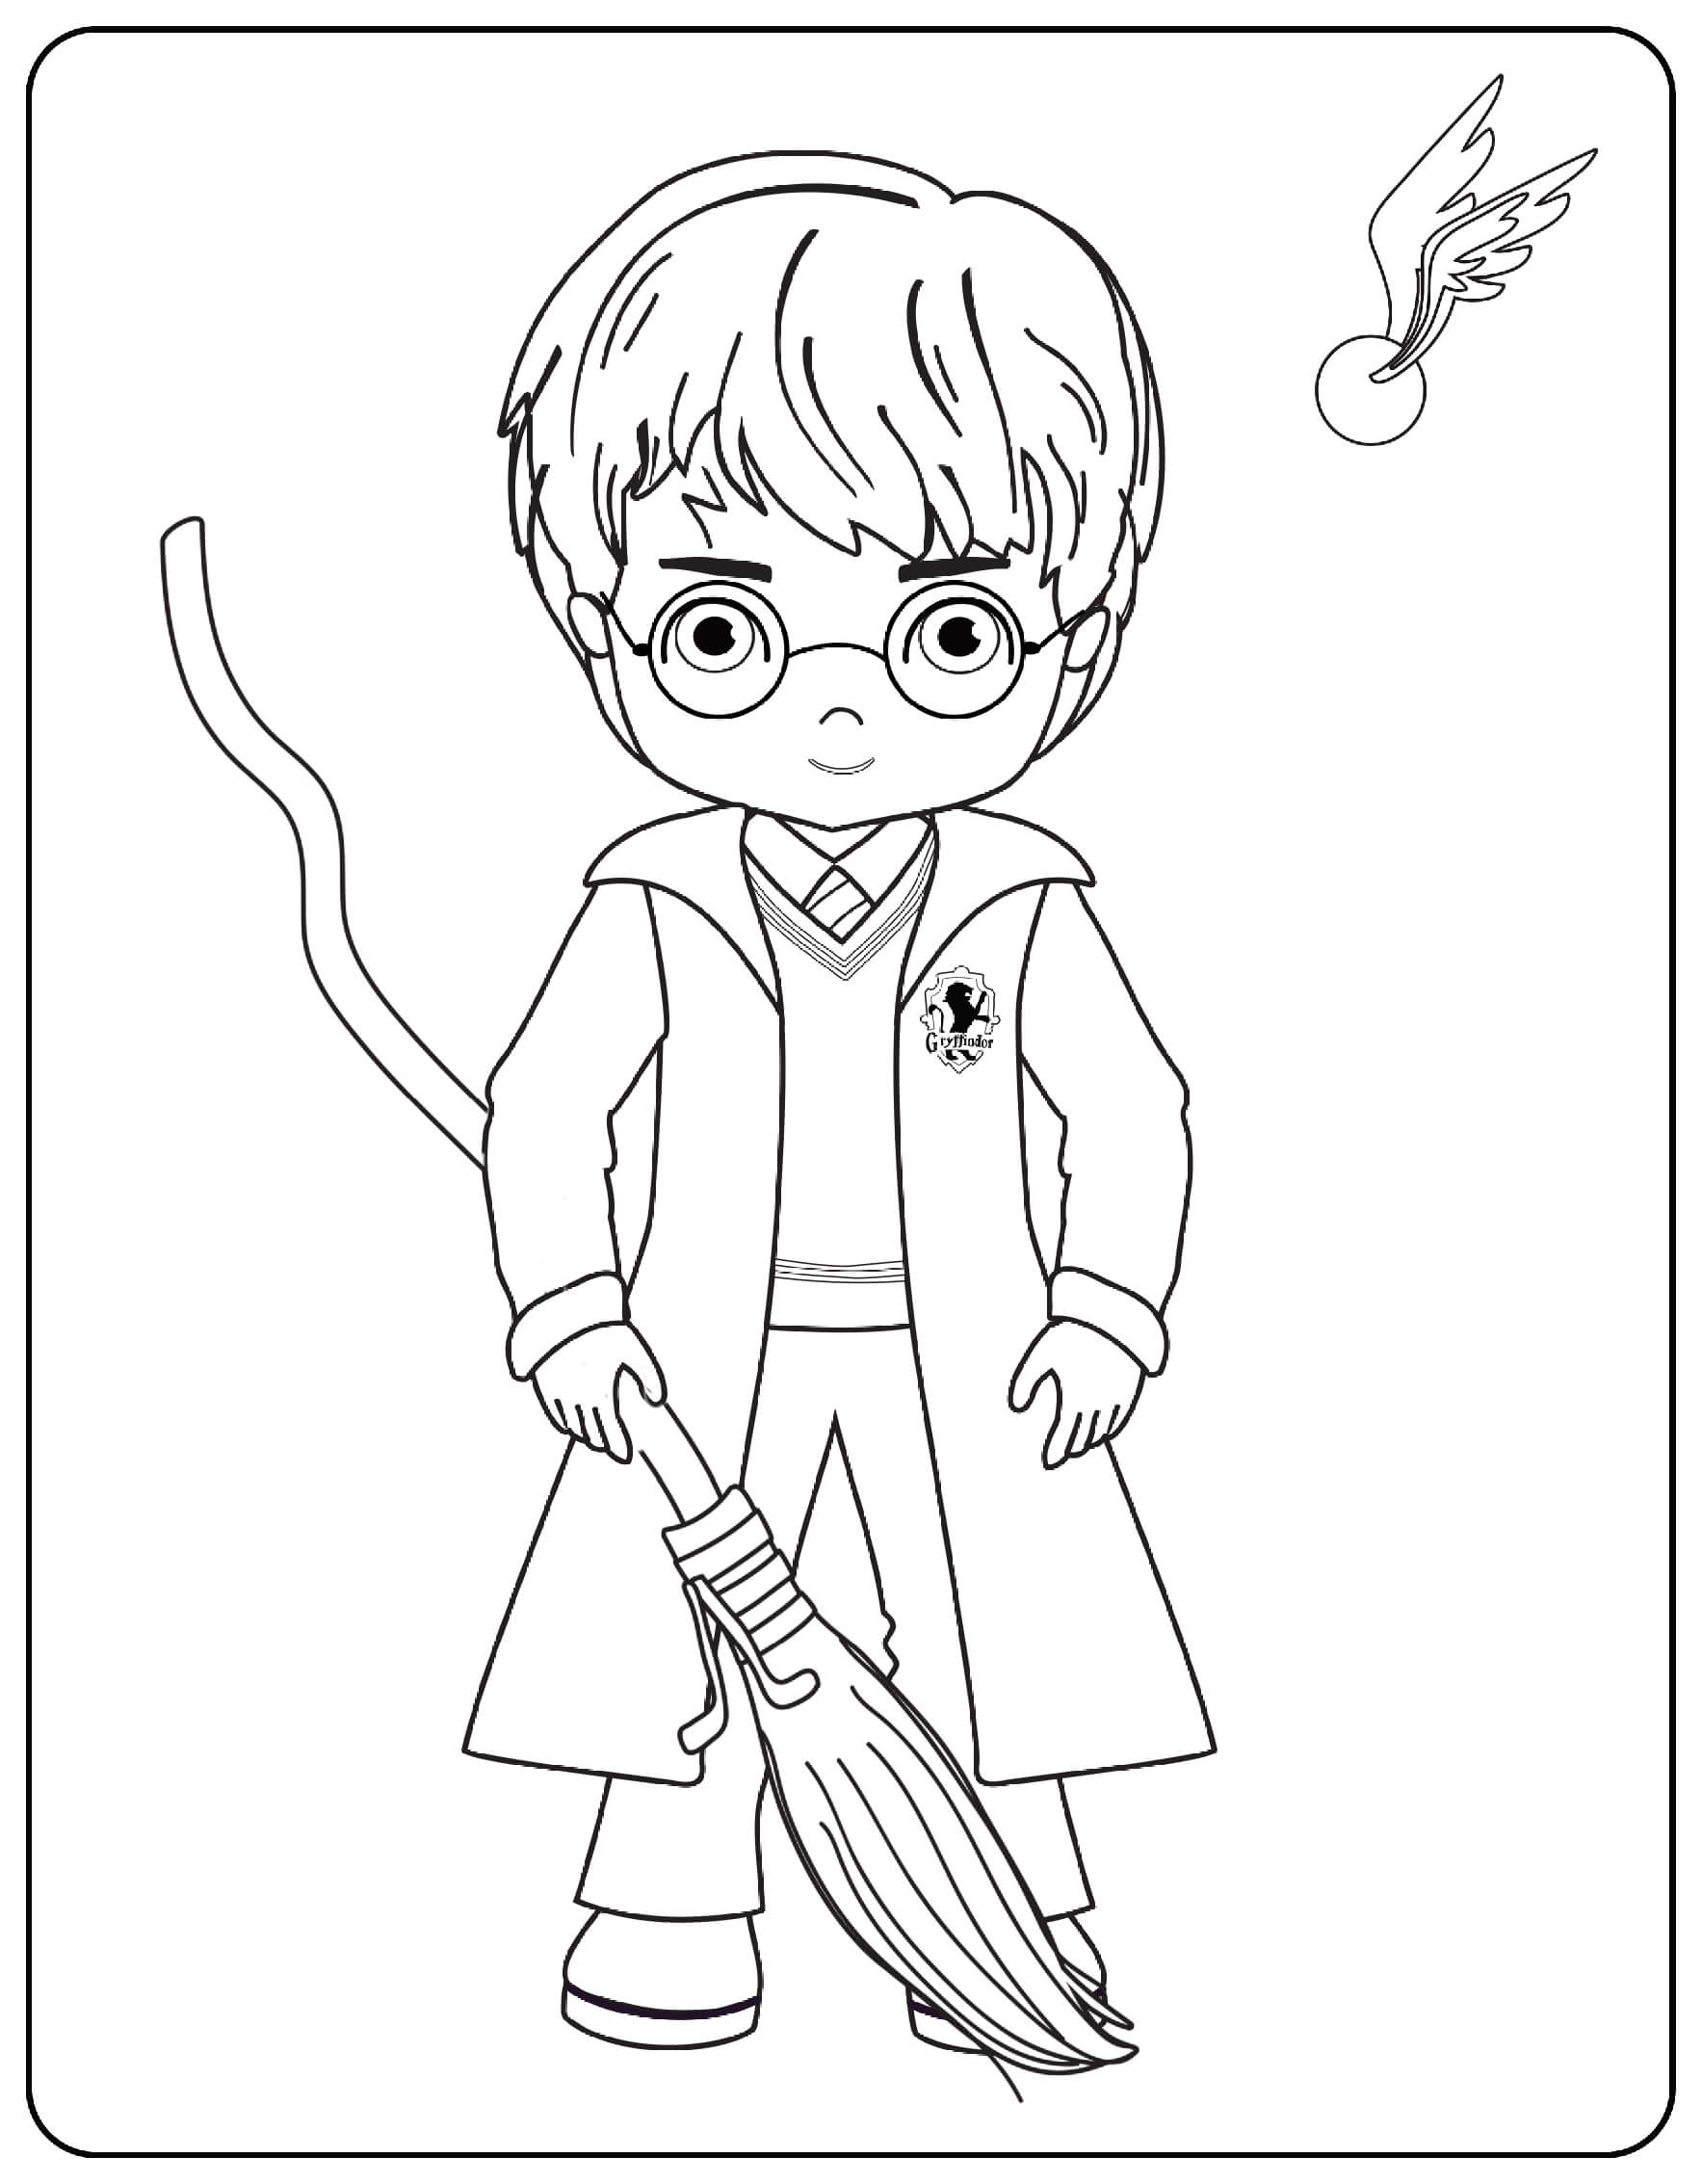 Harry With Broom Coloring Page